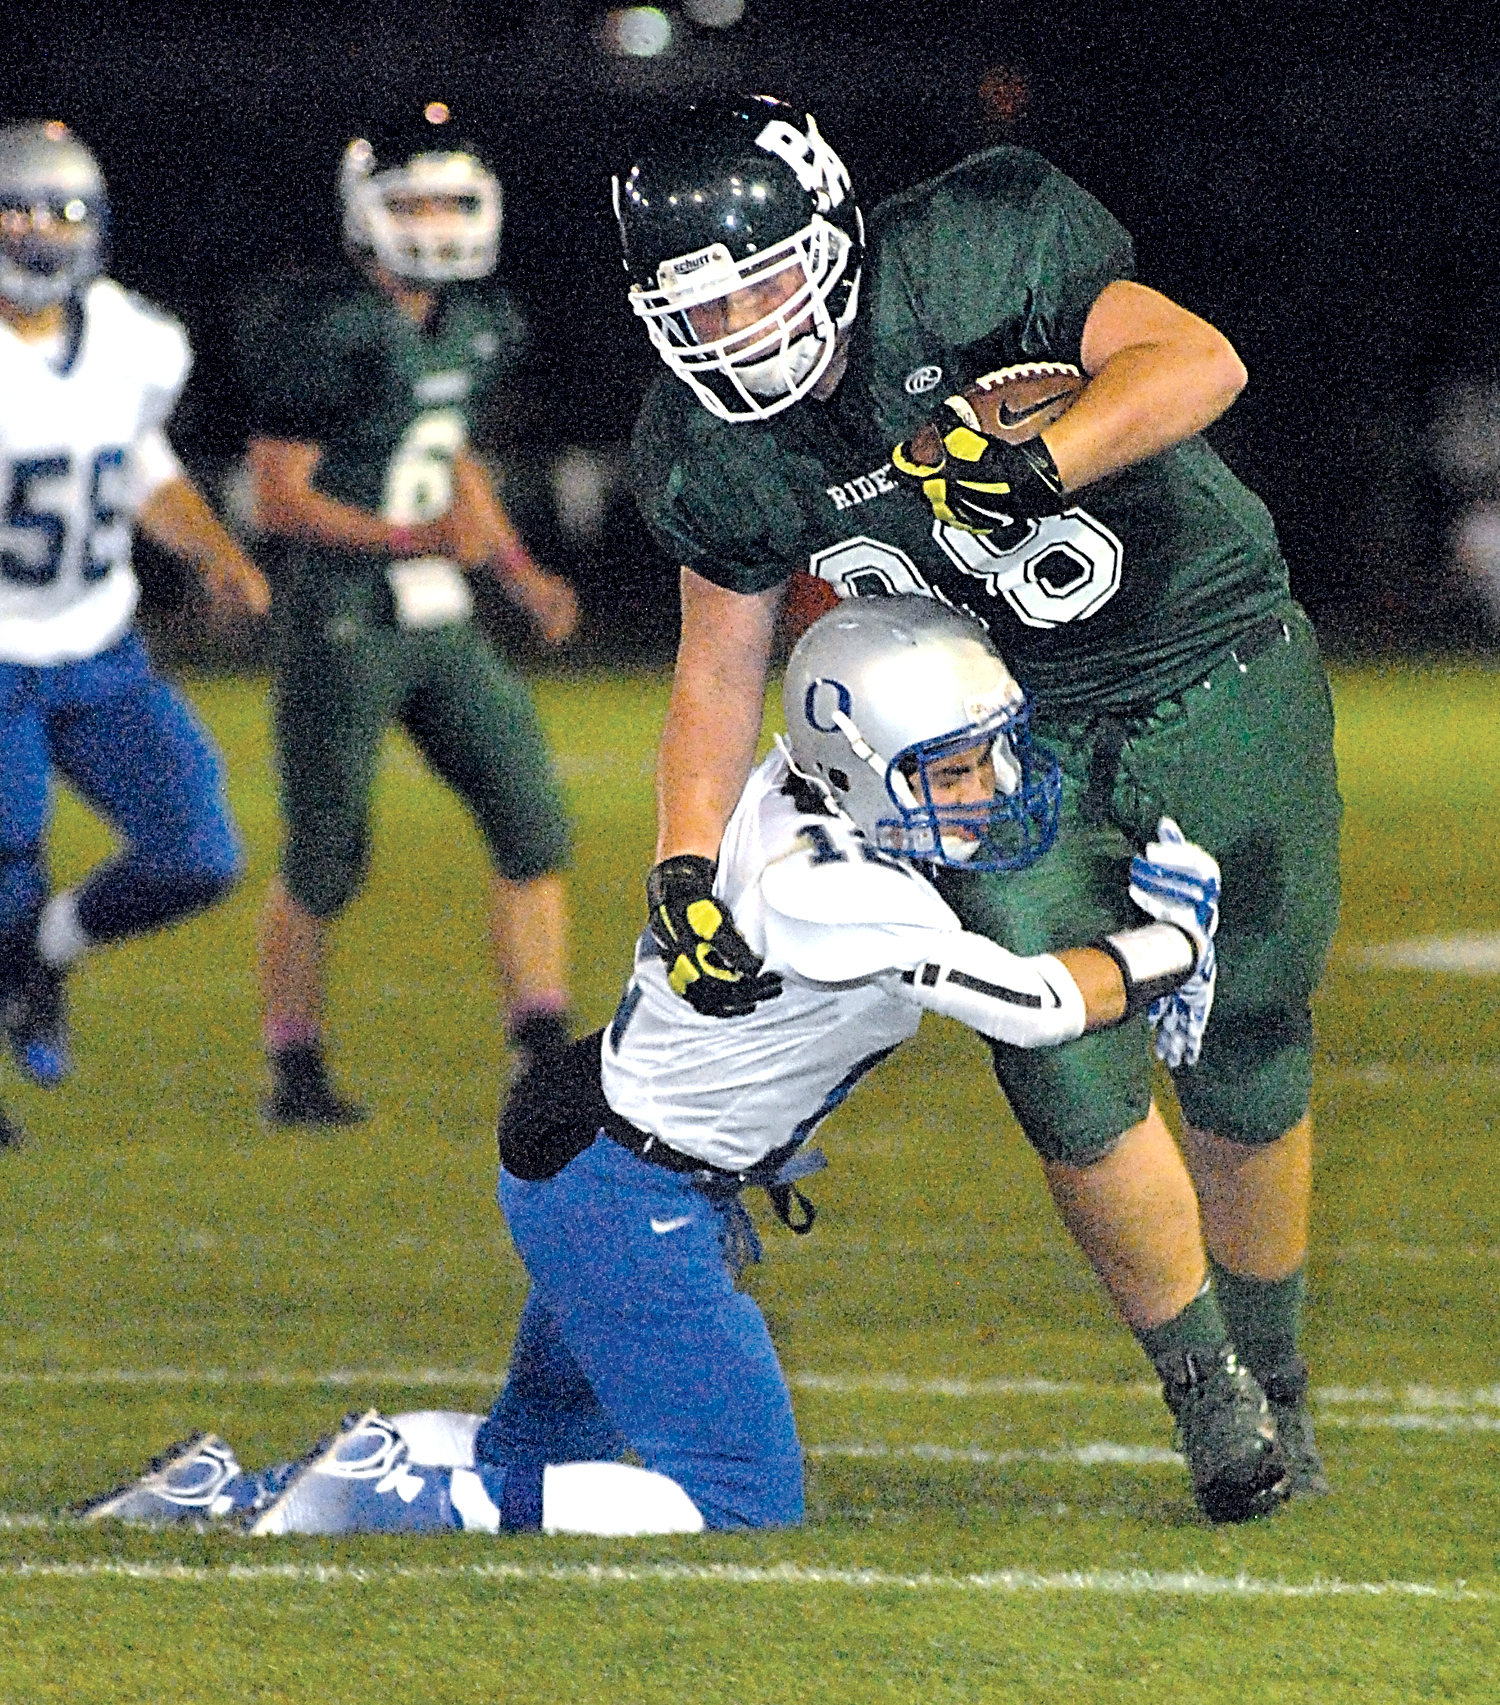 Port Angeles' John Boesenberg tries to elude the tackle of Olympic's Ethan Goldizen at Civic Field. Boesenberg picked up 11 yards on the play. Keith Thorpe/Peninsula Daily News